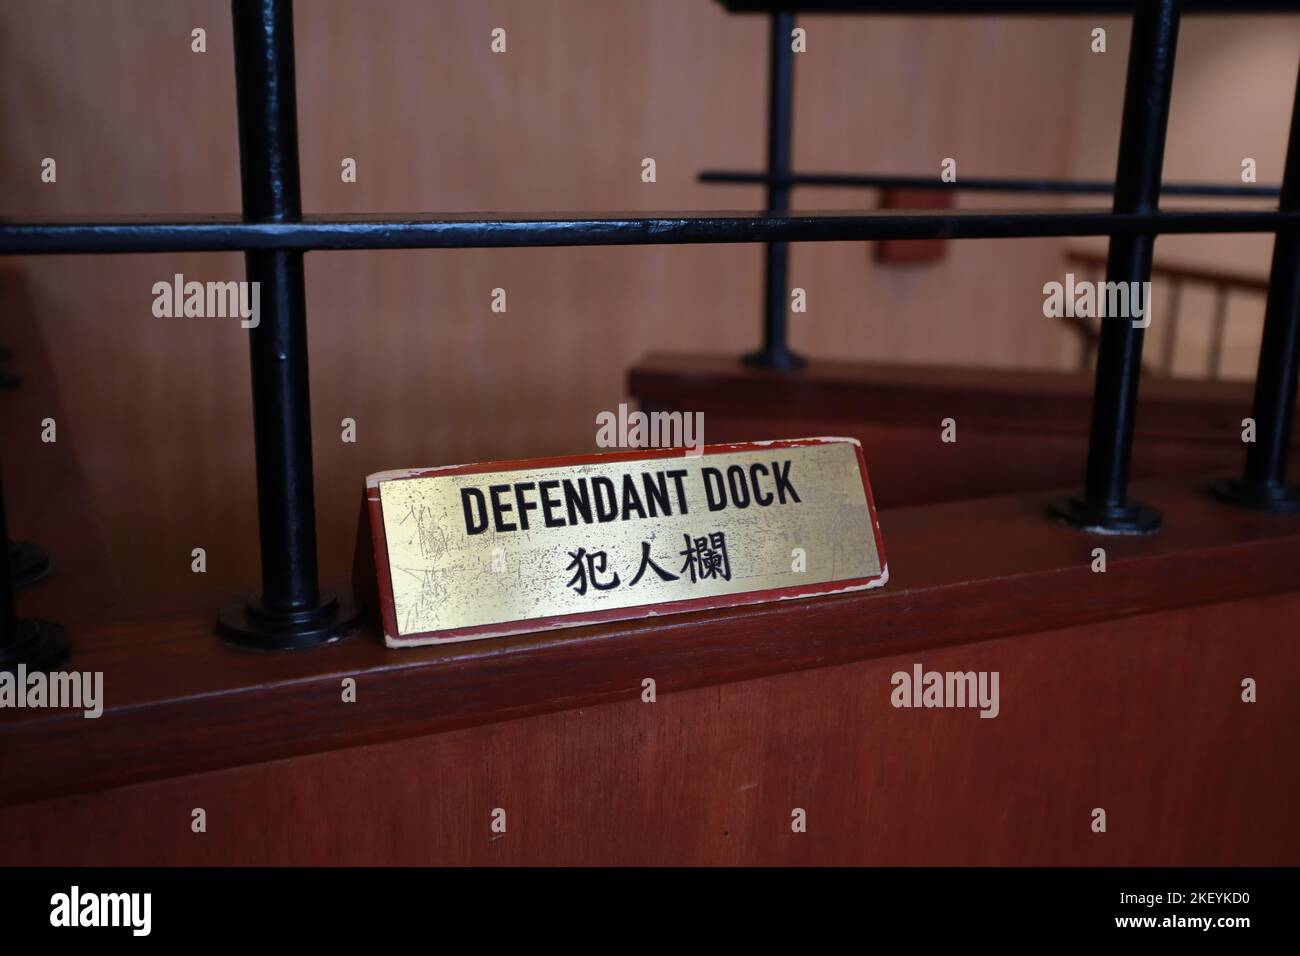 Defendant dock hires stock photography and images Alamy